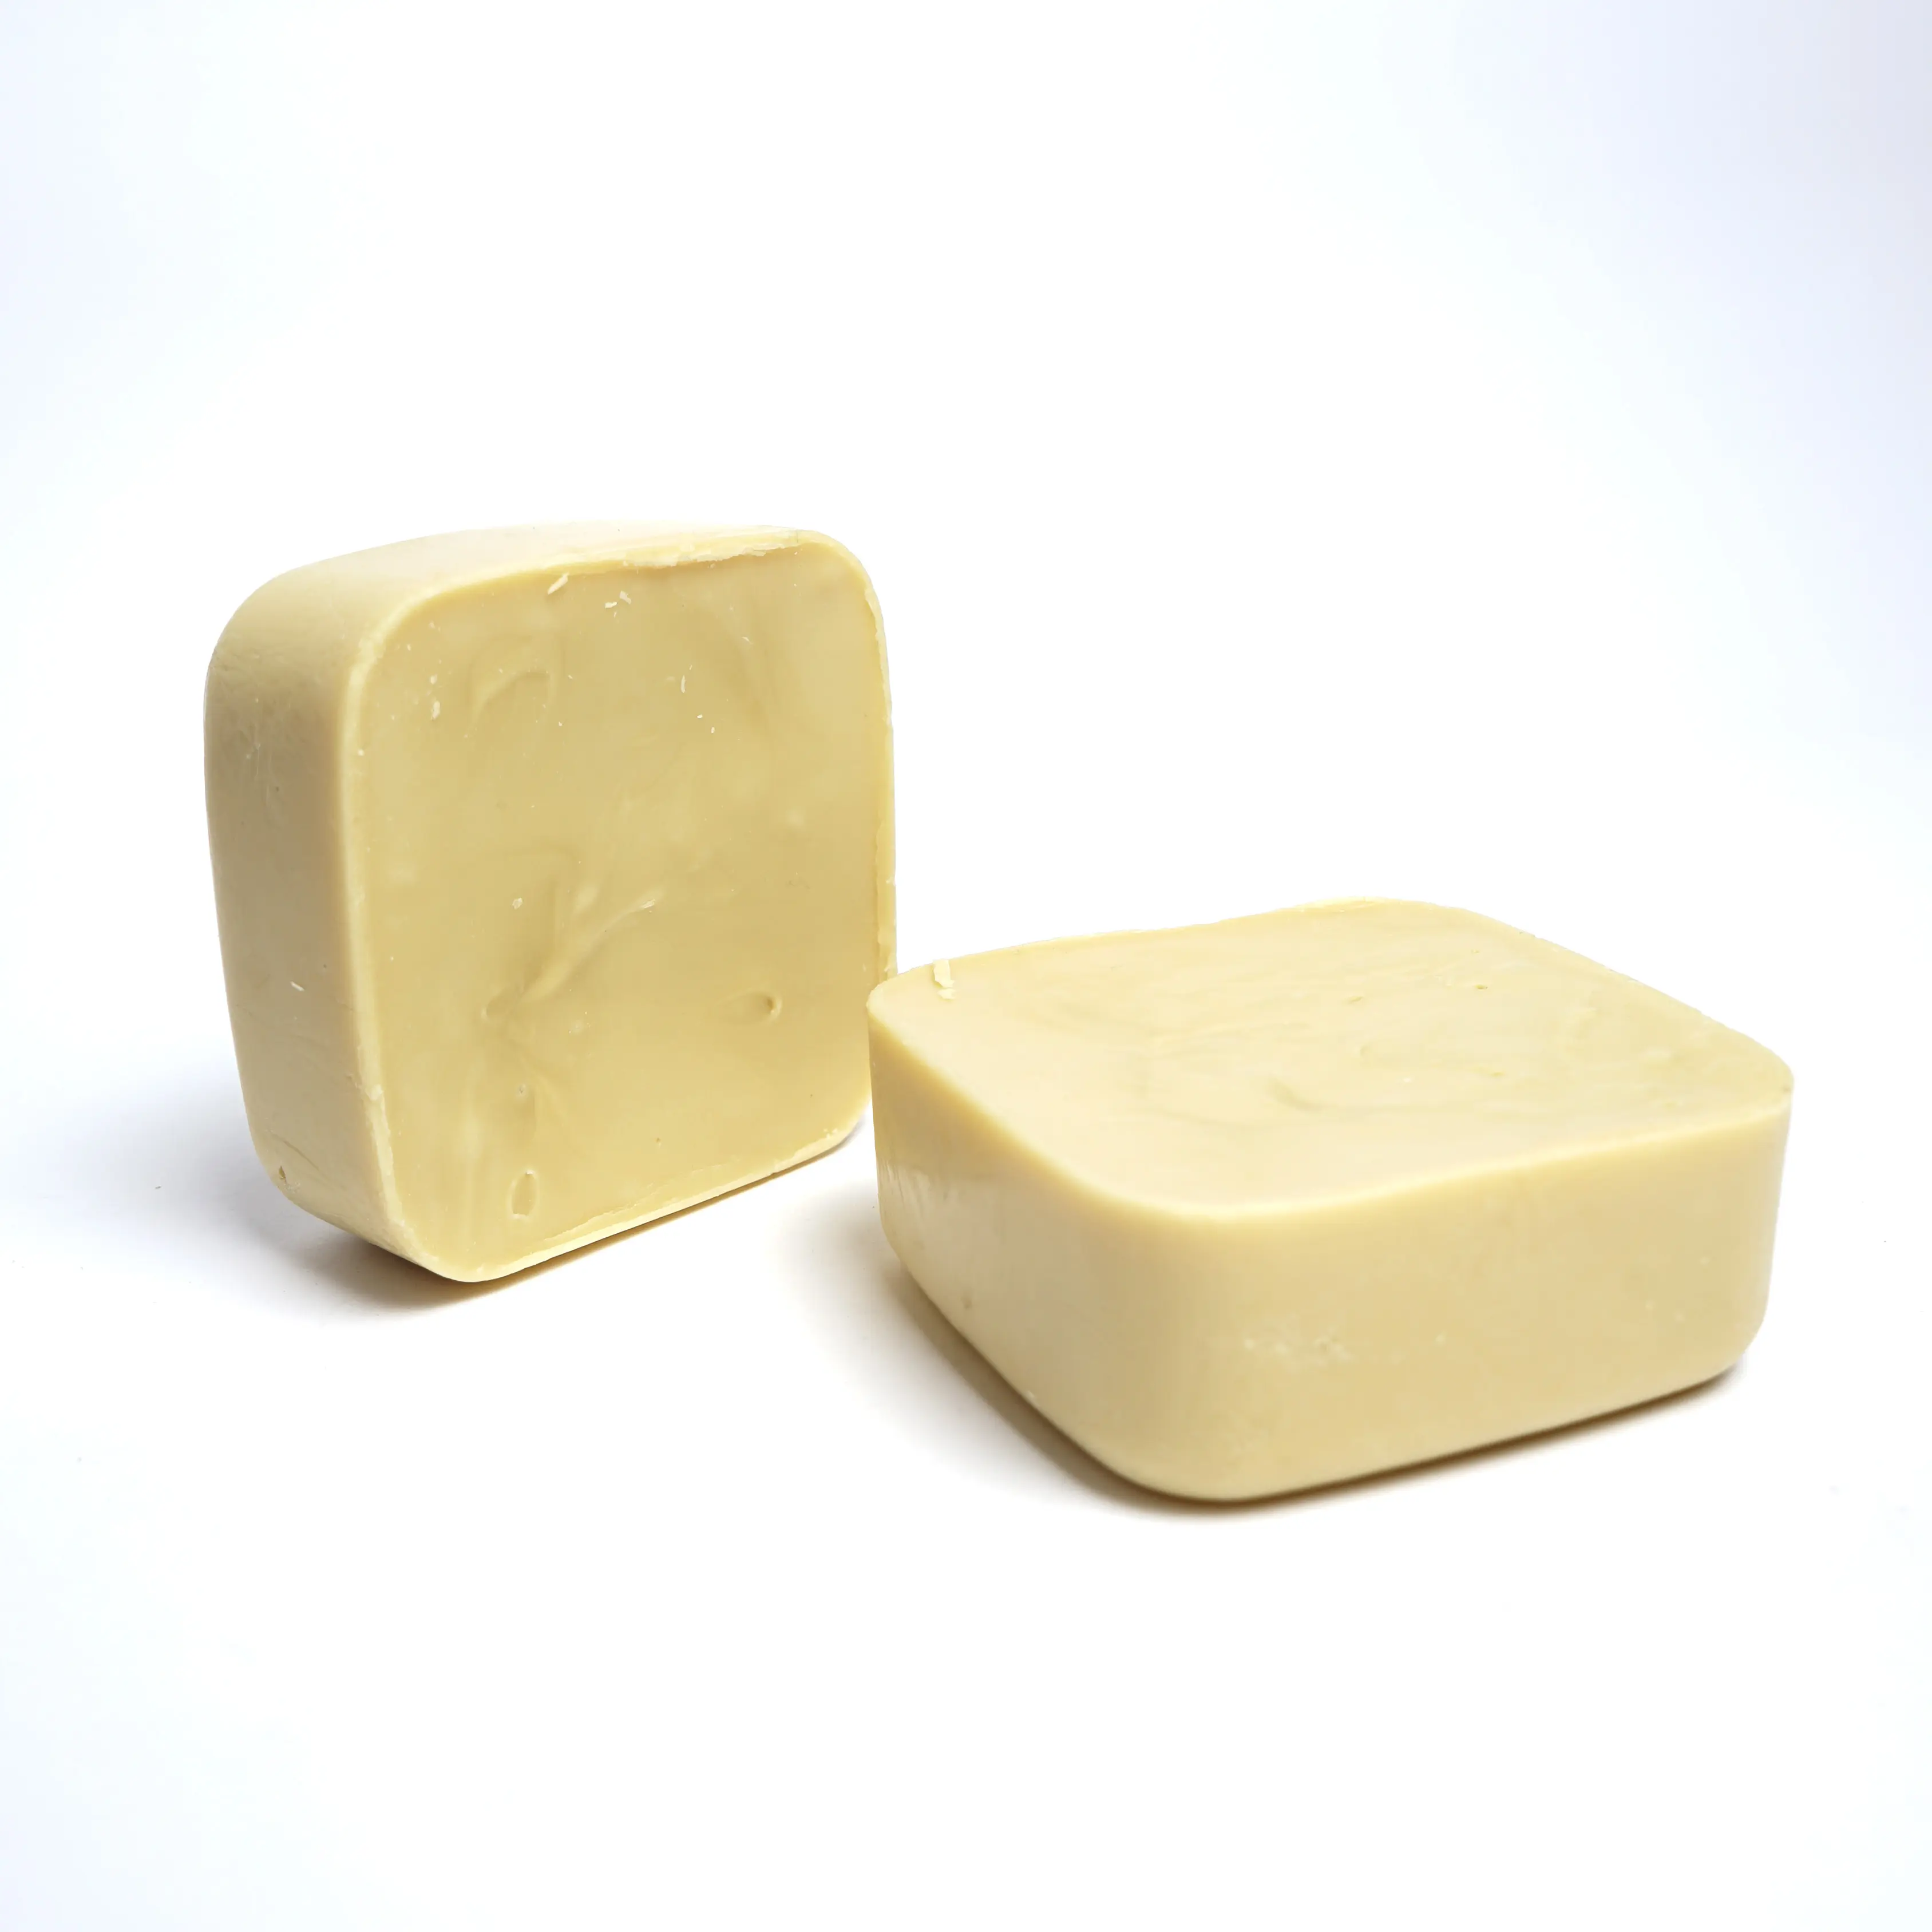 Best Quality Cocoa Butter - Pure Prime Pressed Fress Fatty Acids Max. 1.75% and Flvor Normal